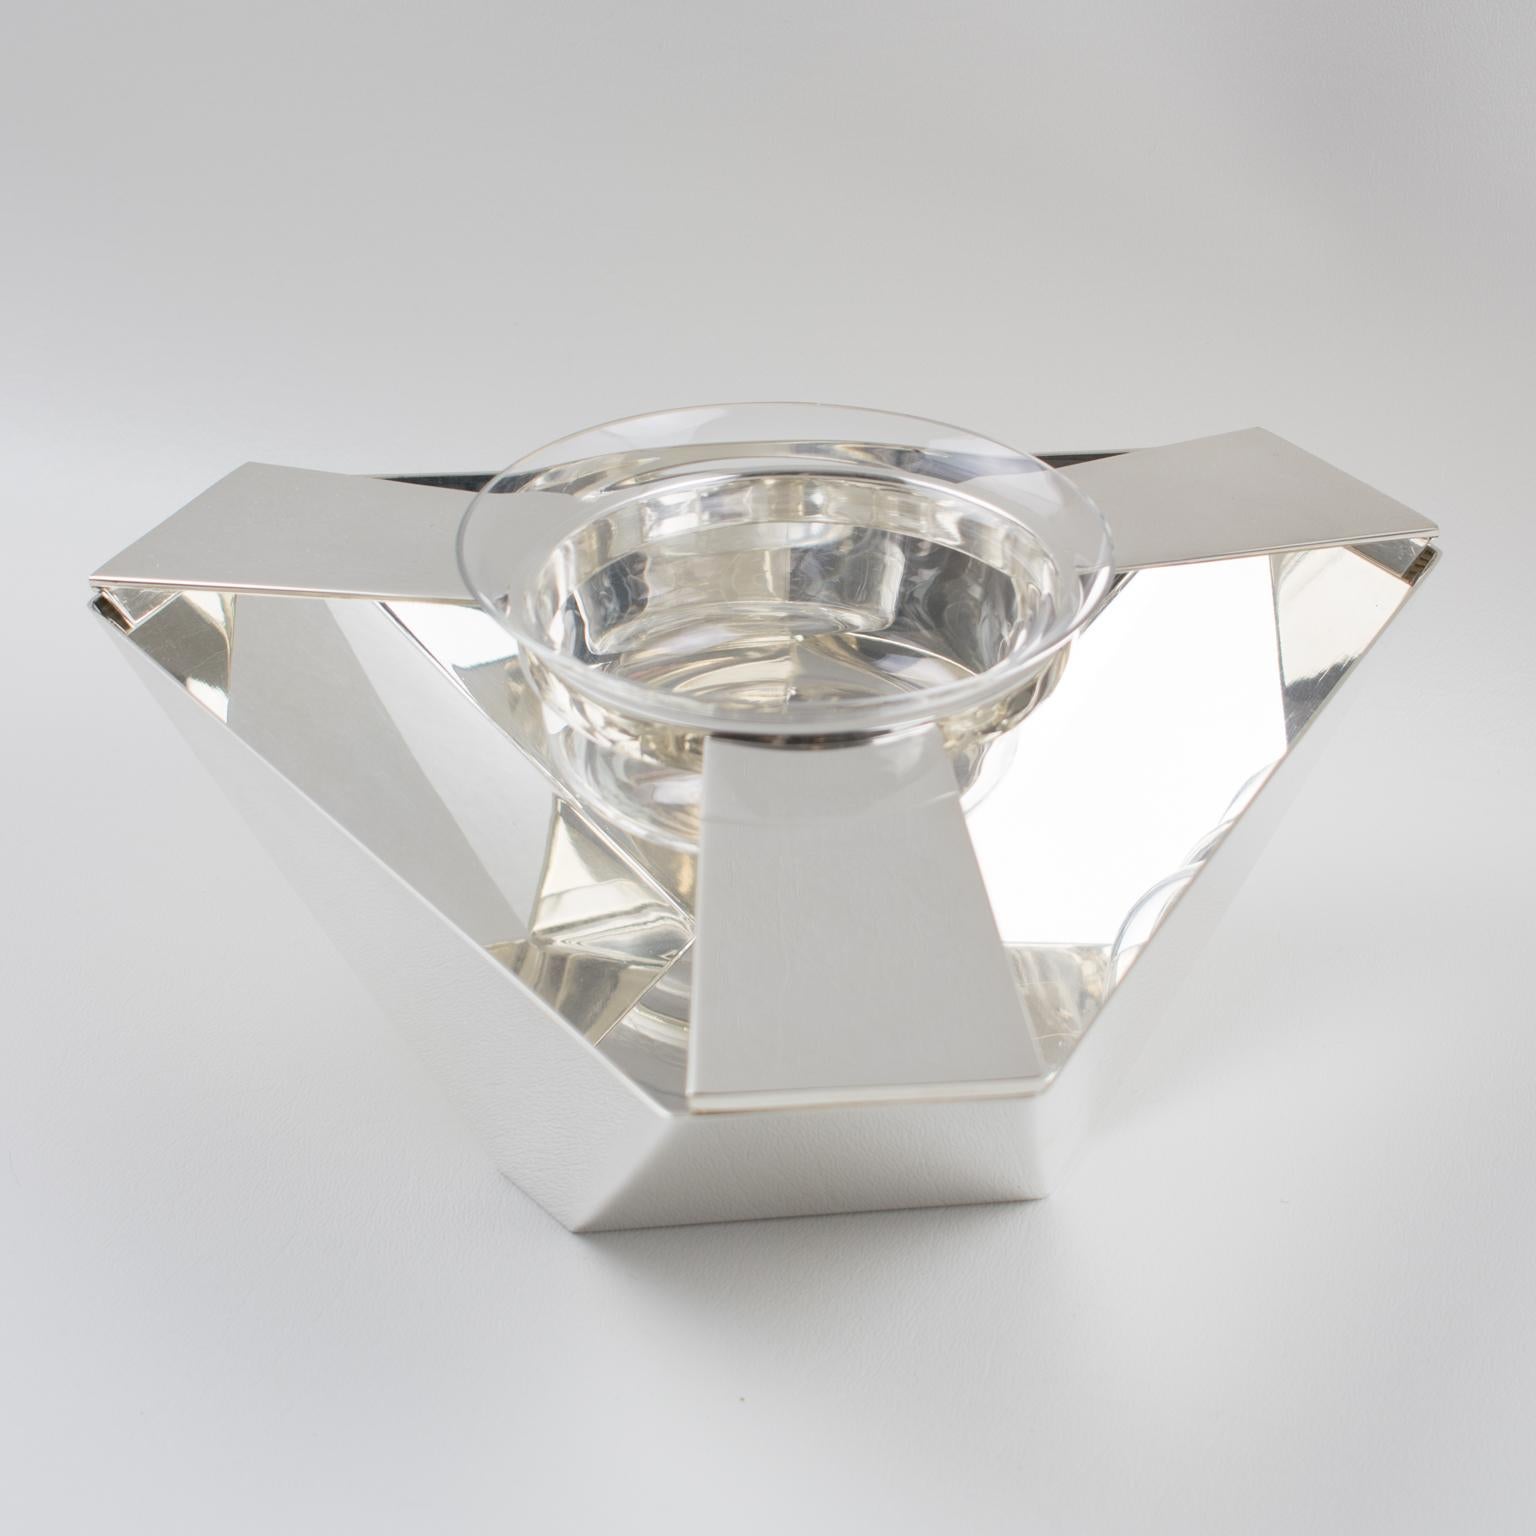 Silver Plate and Crystal Caviar Bowl by Ken Benson for St James Brazil 1